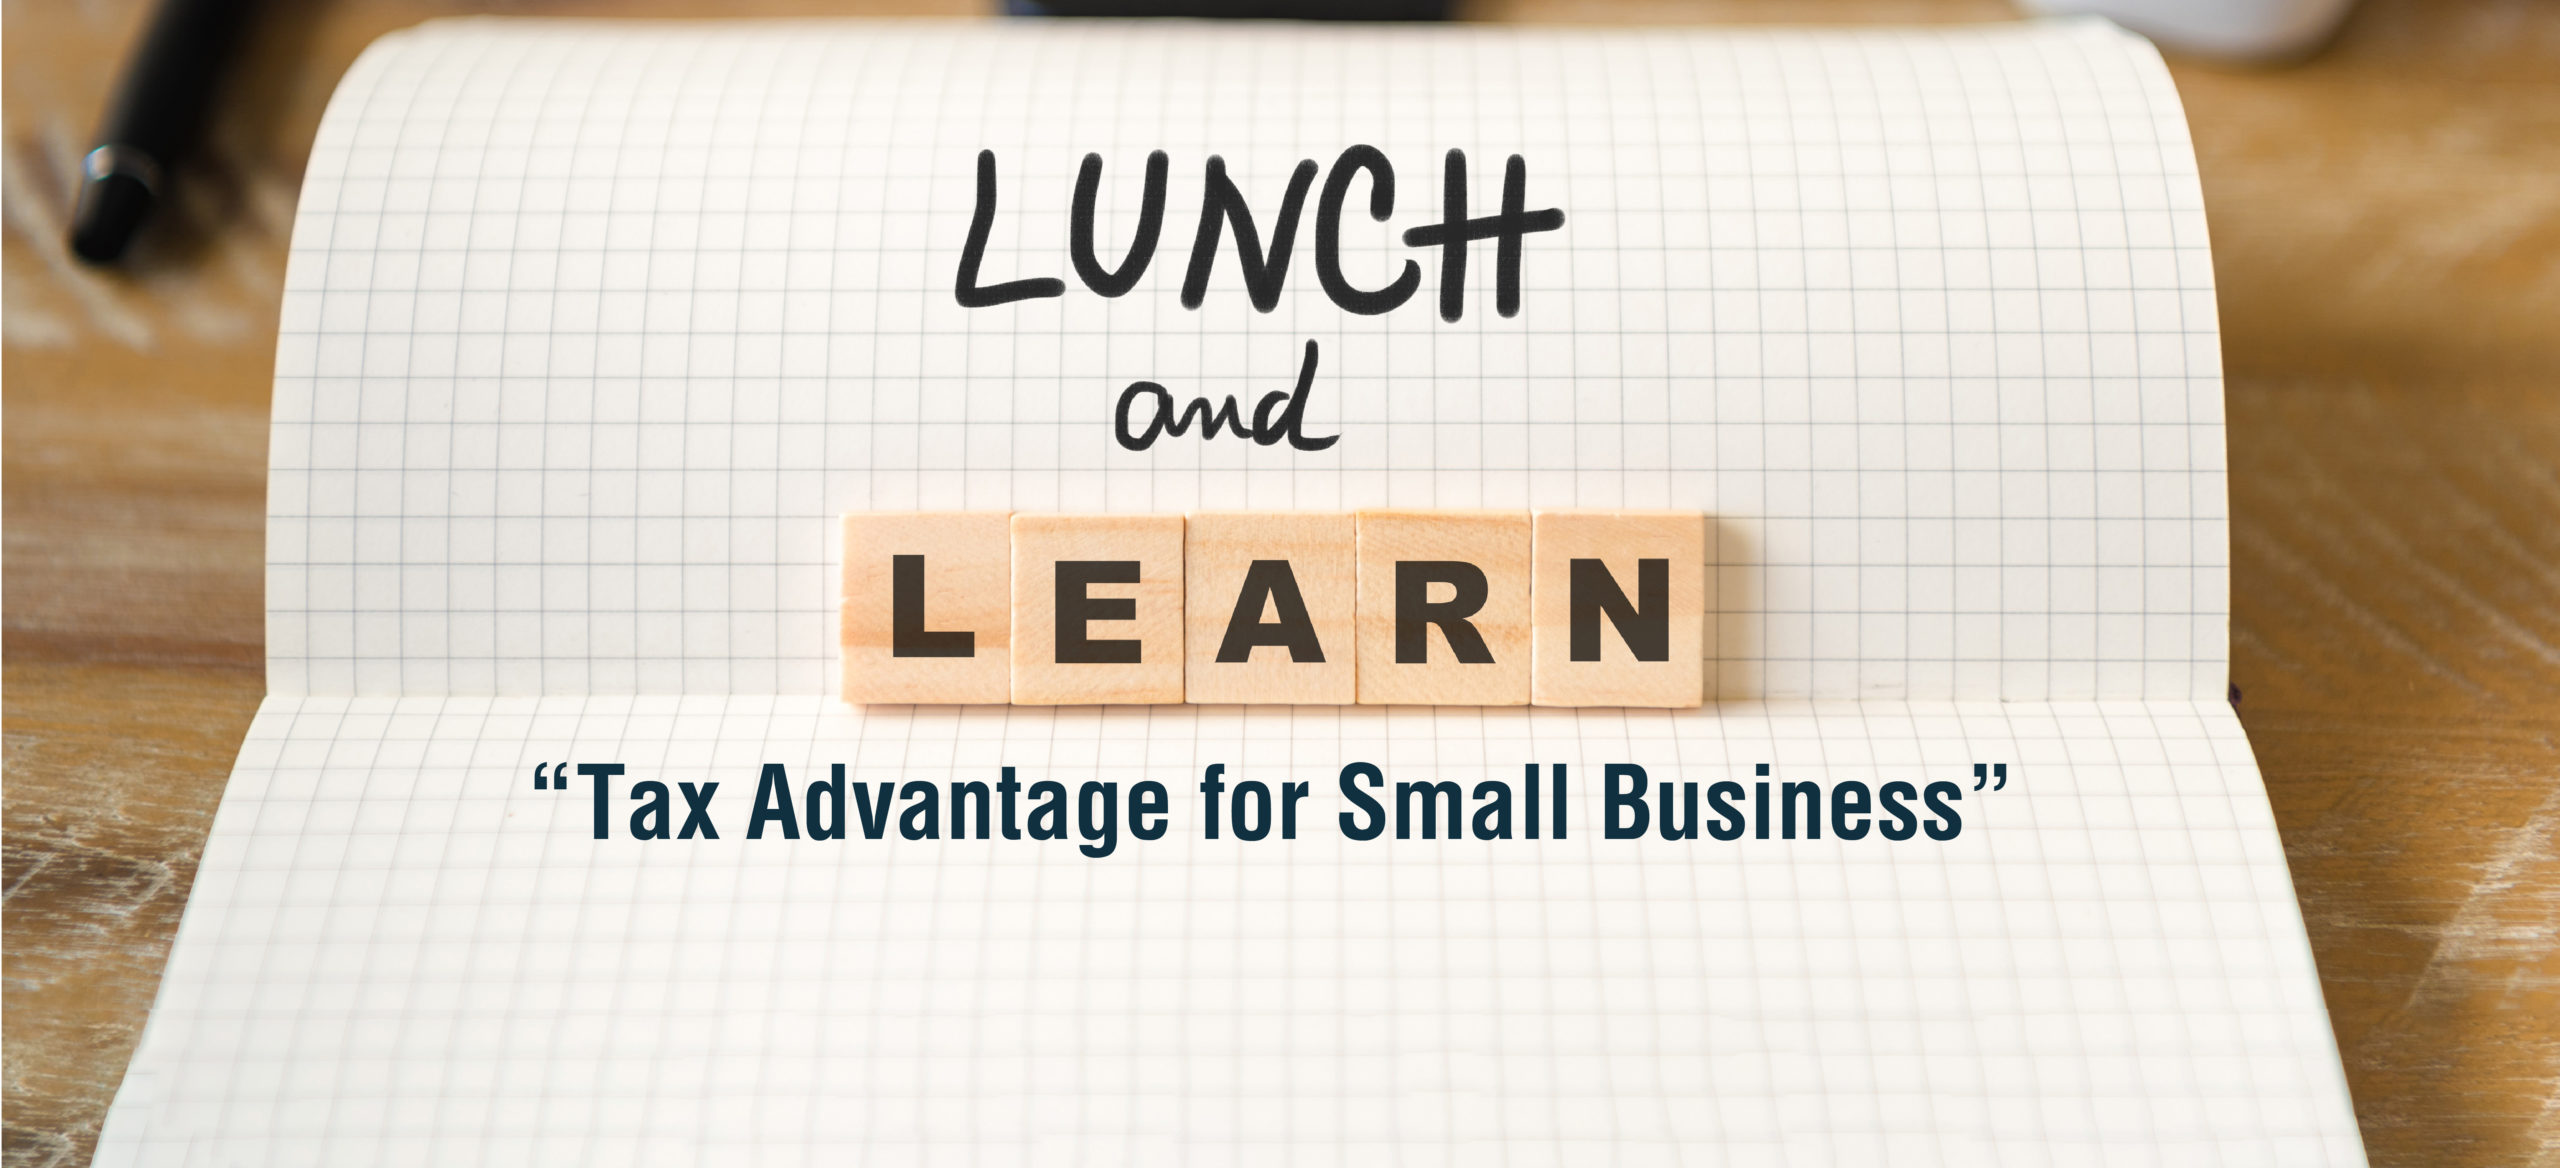 Lunch and Learn – Tax Advantage for Small Business